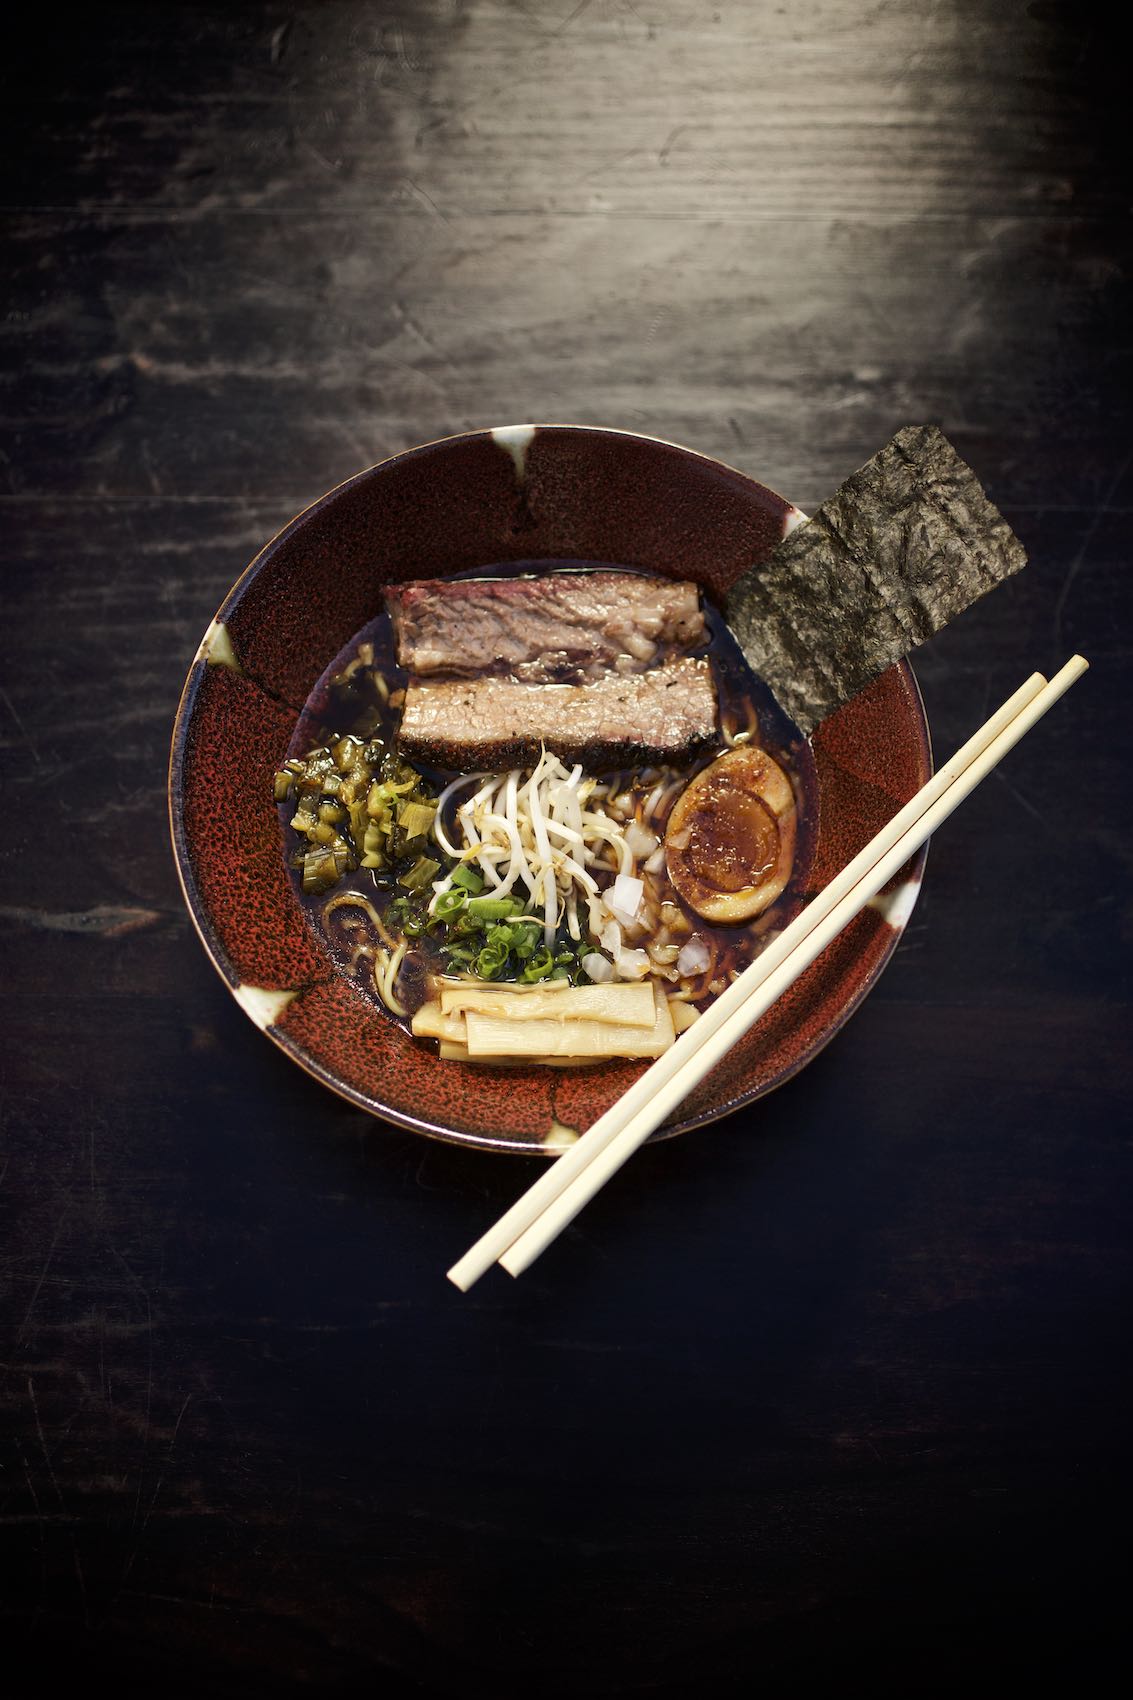 Jody Horton Photography - Kemuri ramen noodles with assorted toppings and chopsticks. 